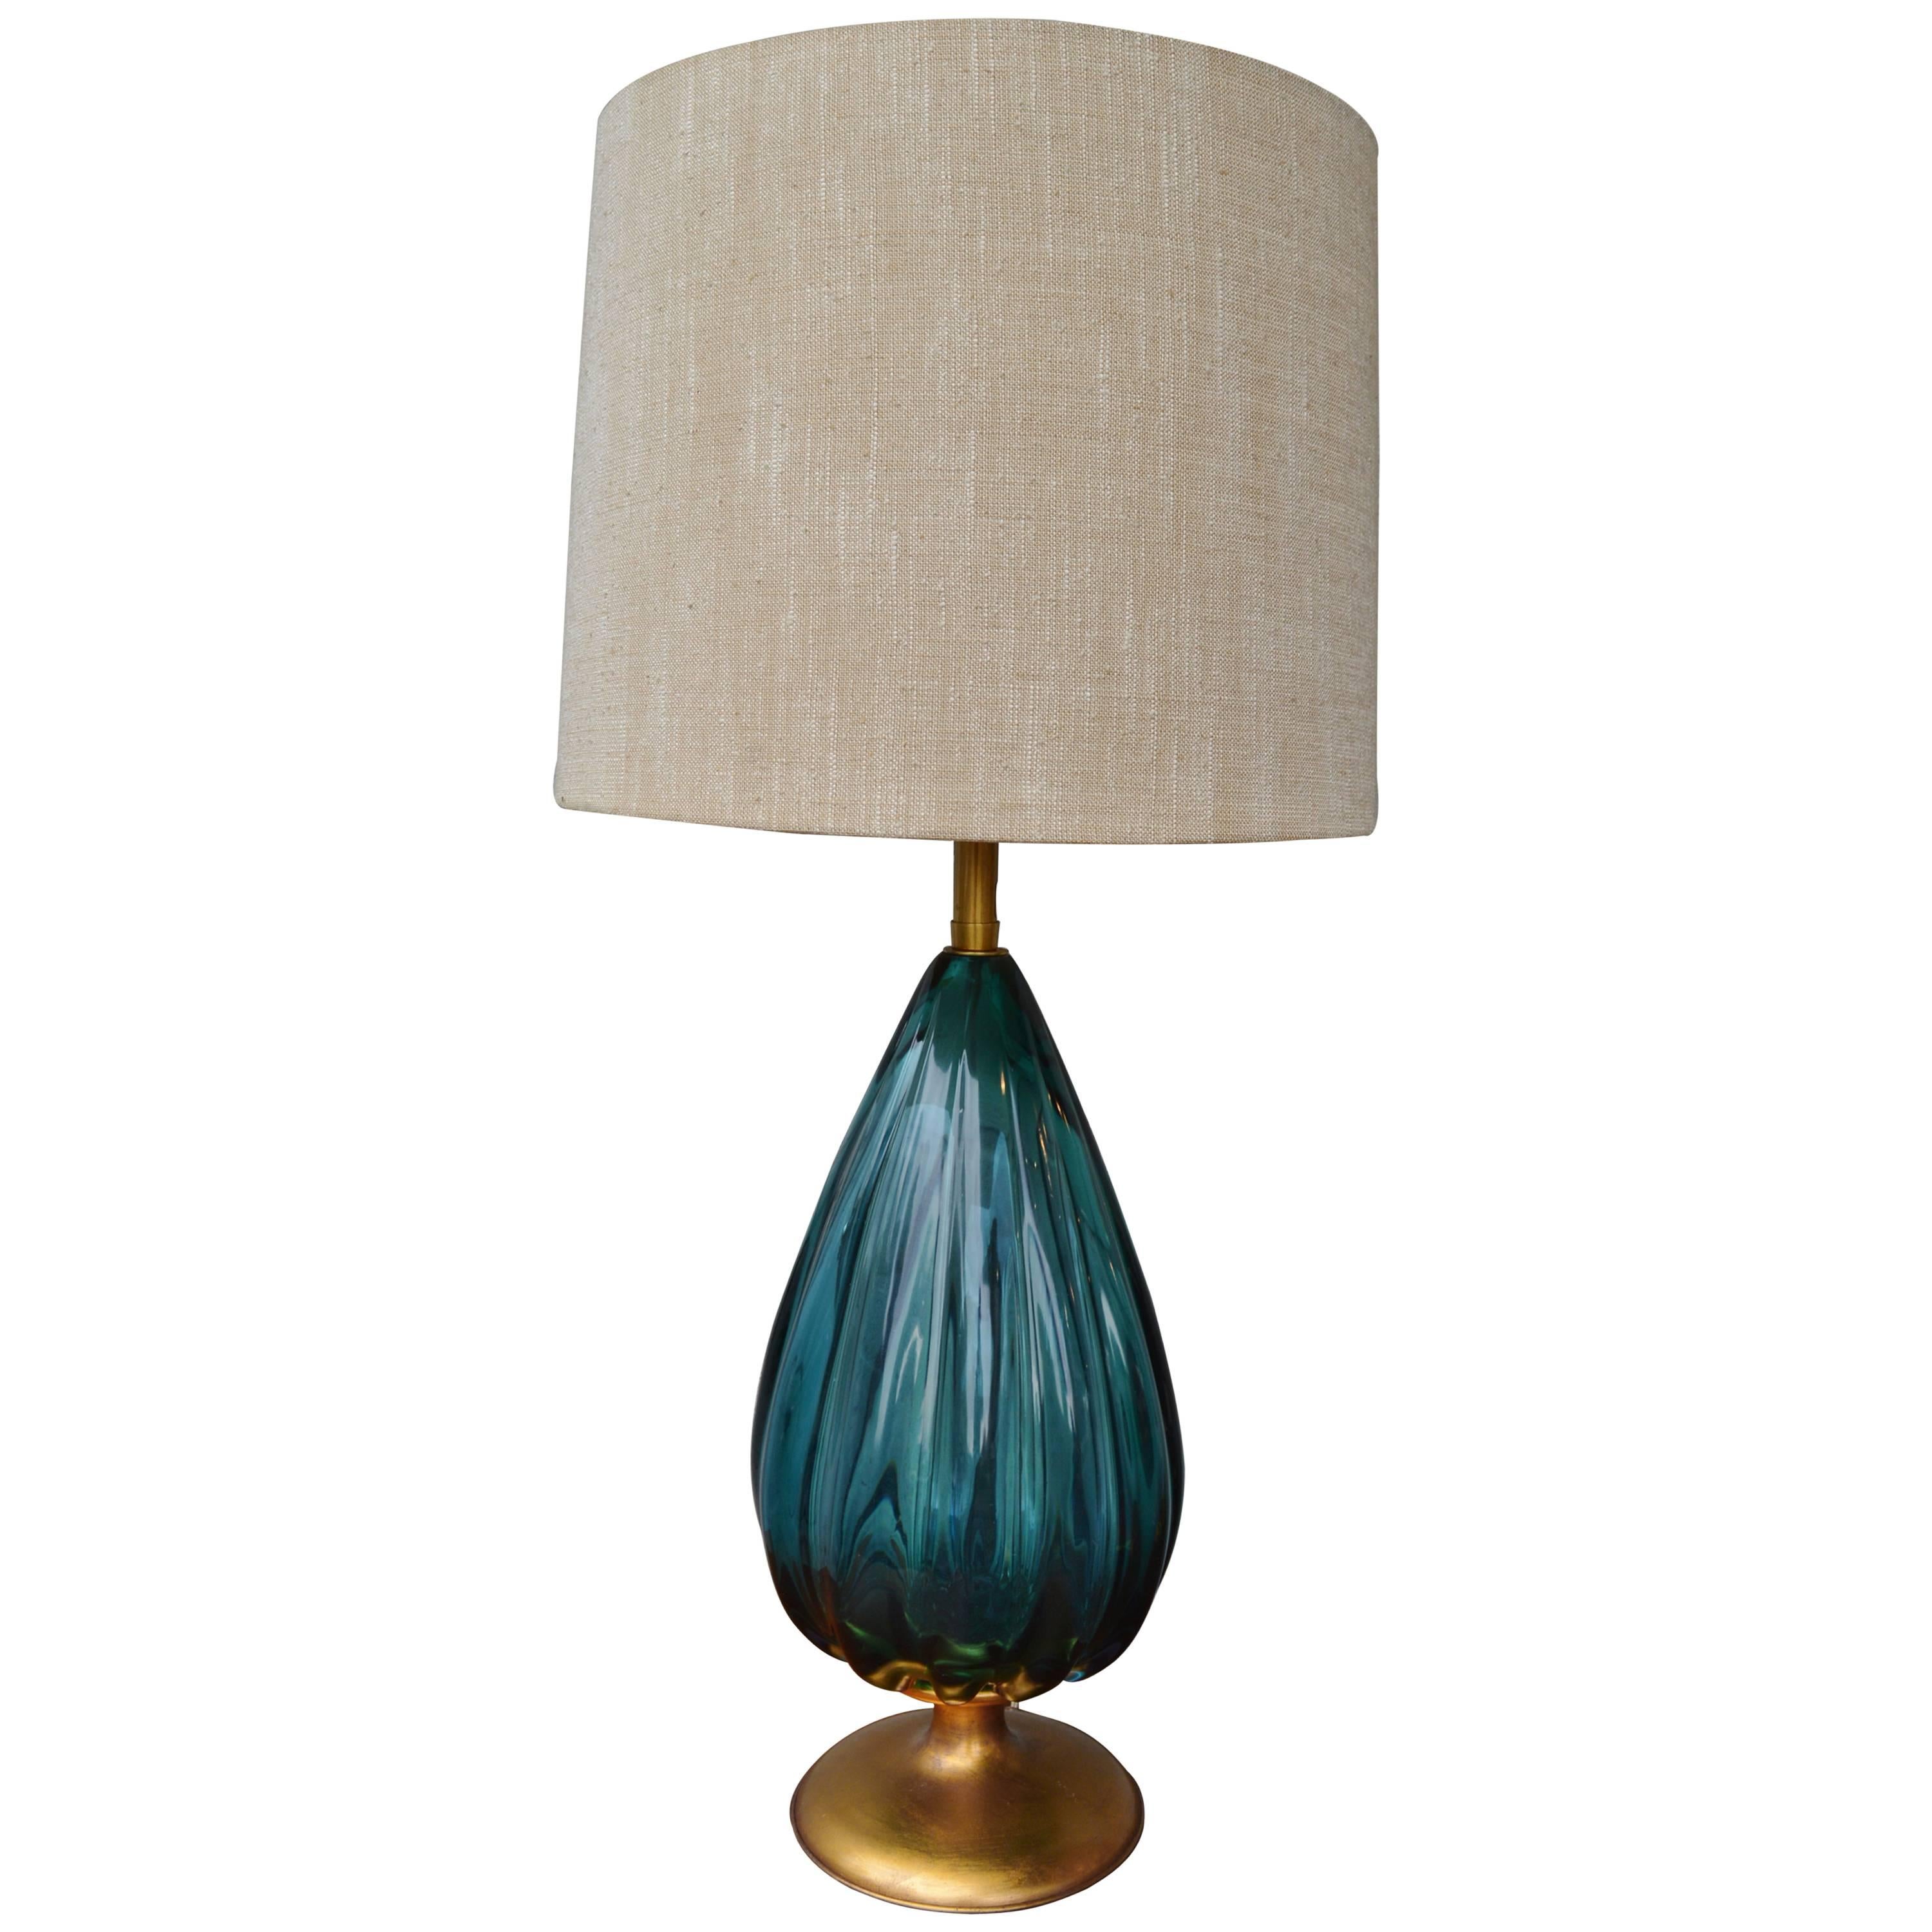 Peacock Blue Murano Lamp by Archimede Seguso for The Marbro Lamp Co